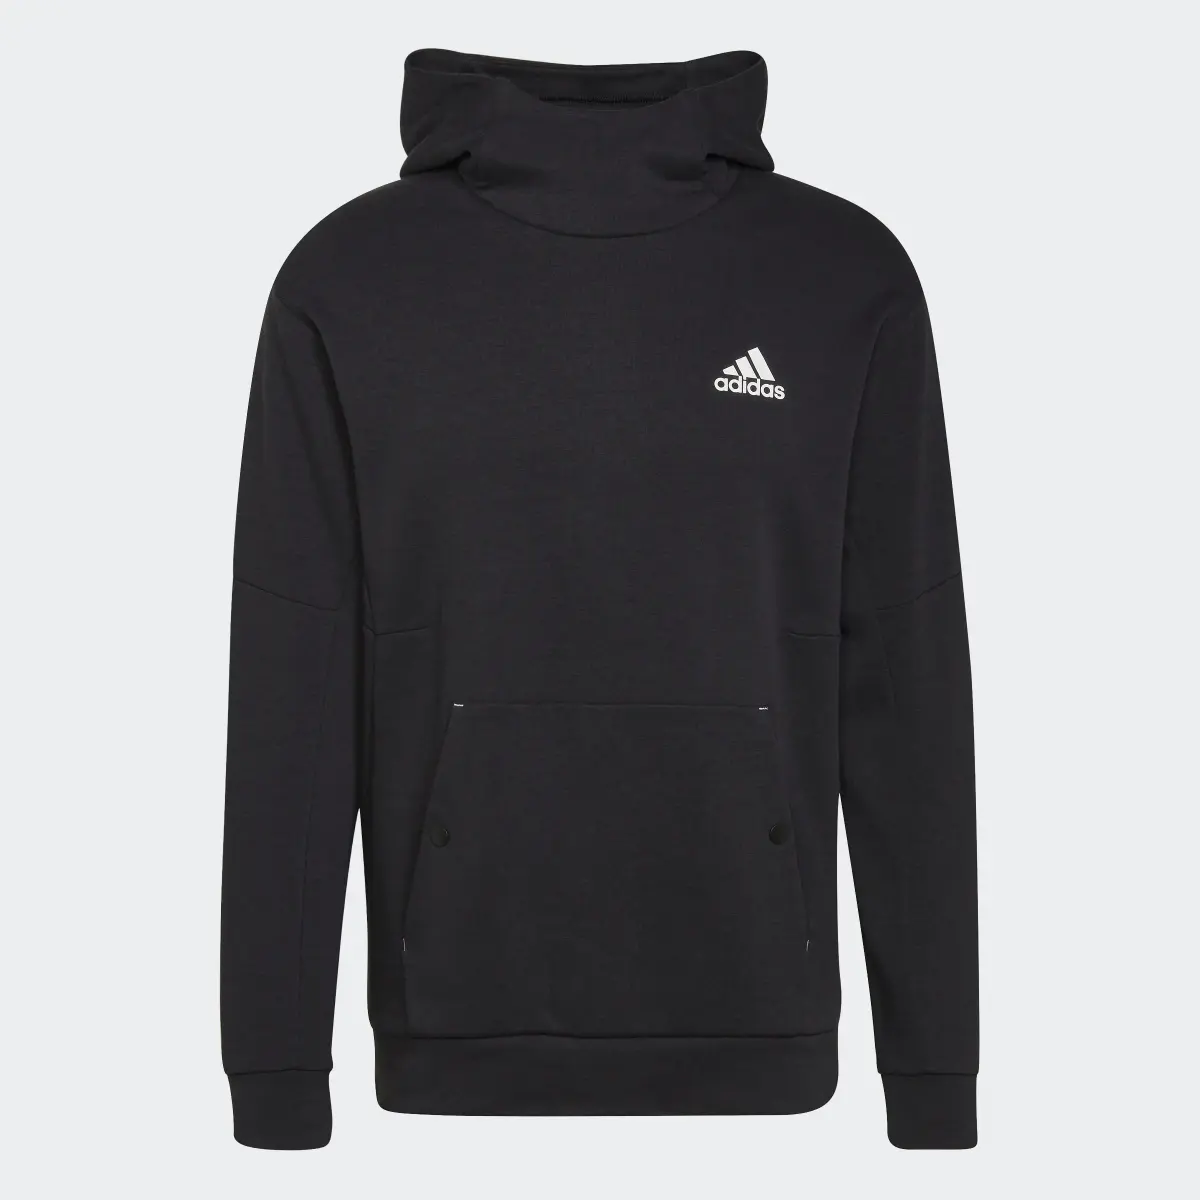 Adidas Designed for Gameday Hoodie. 1